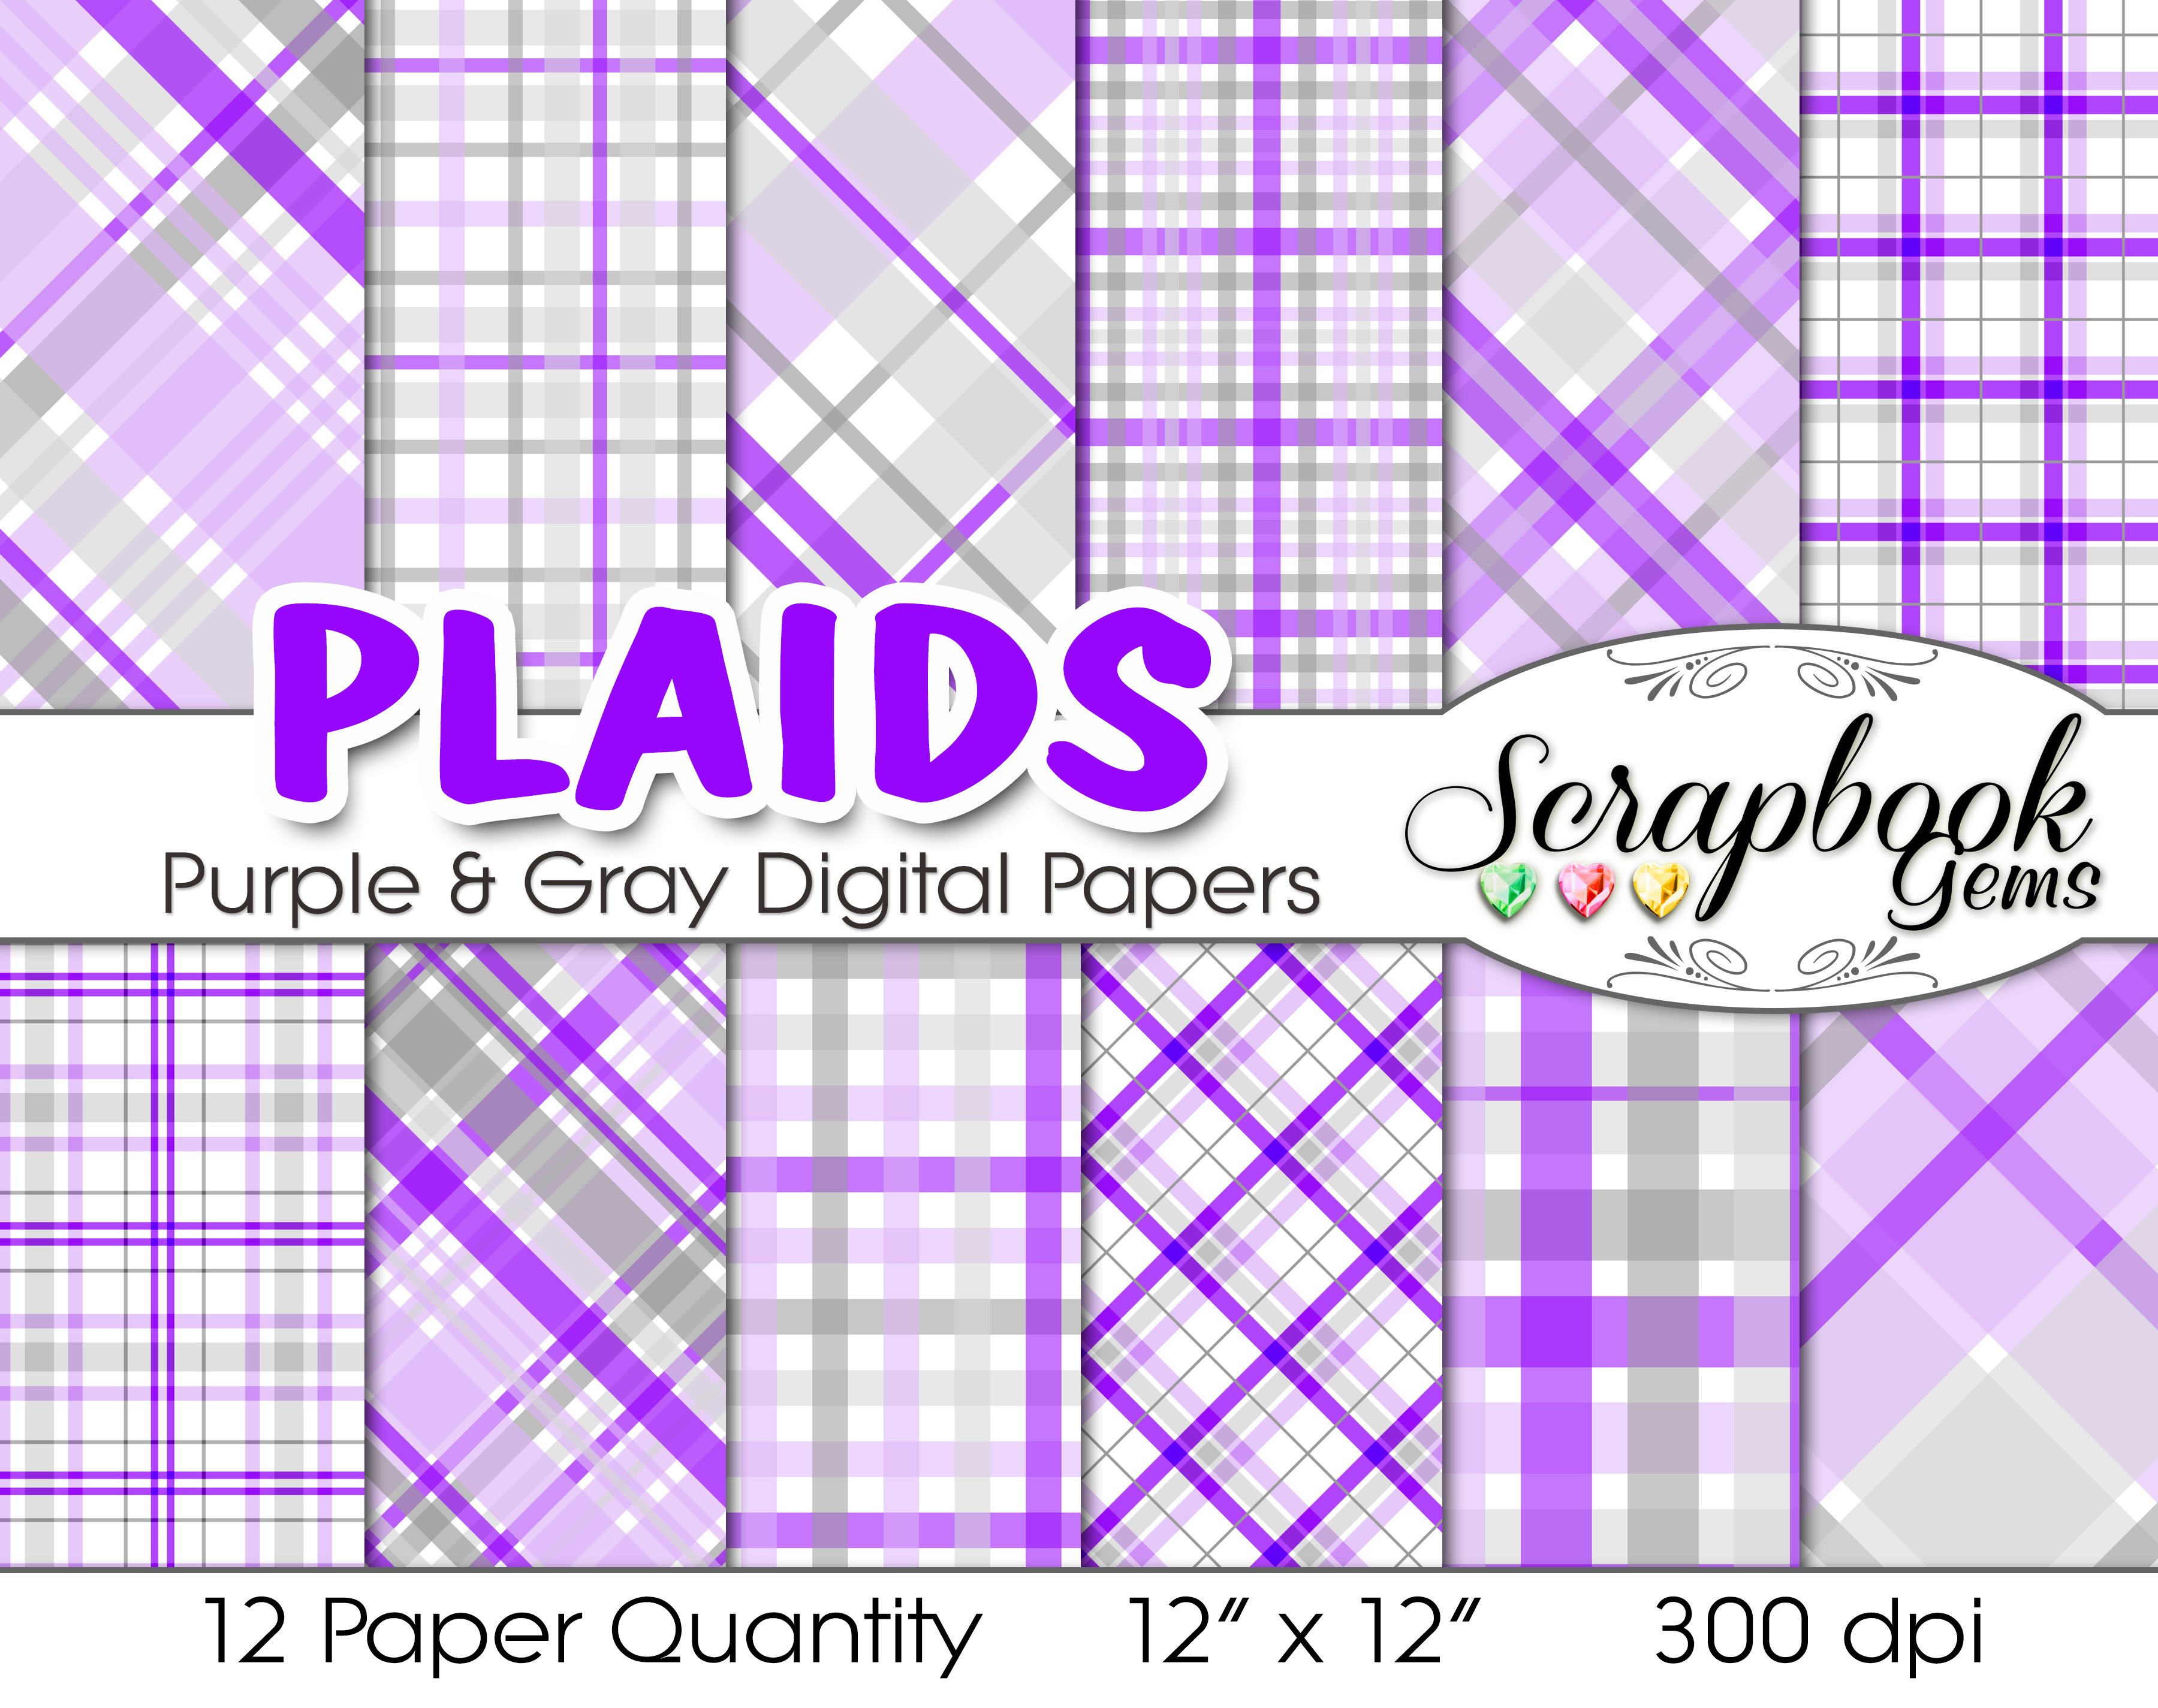 Purple & Gray Plaid Digital Papers cover image.